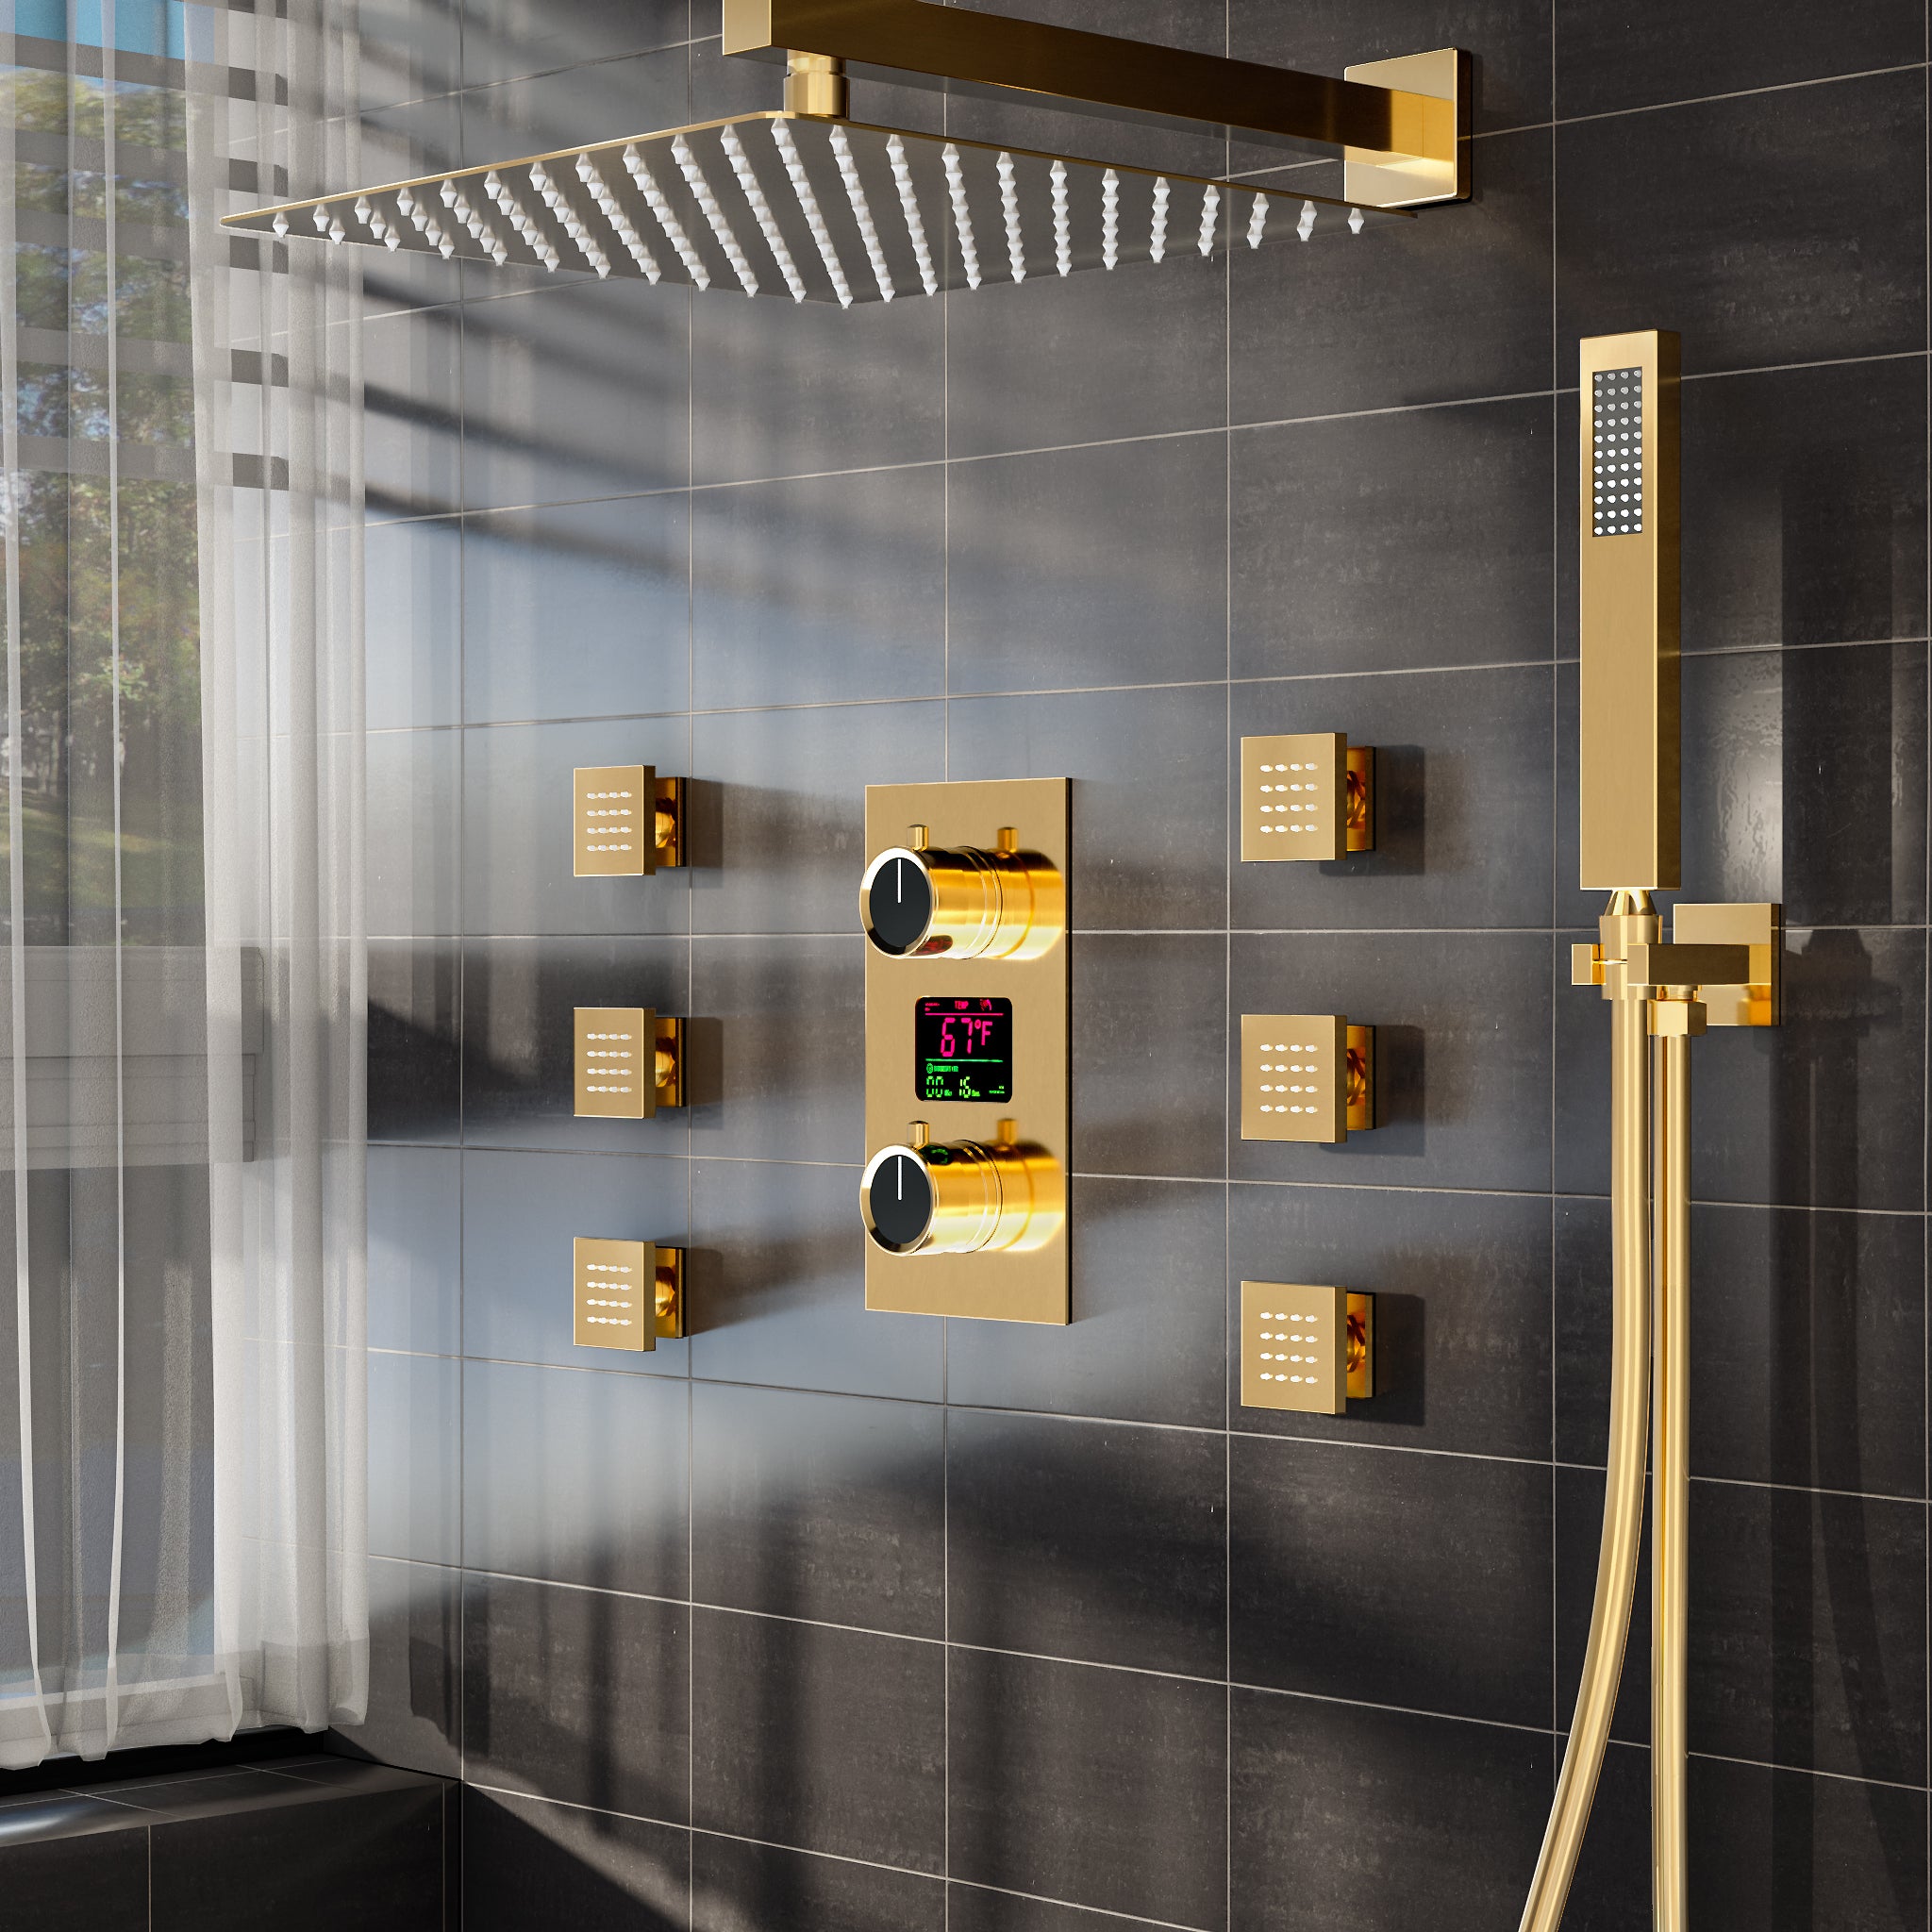 SFS-1014-GD12 EVERSTEIN Wall Mounted Constant Temperature Shower Faucet with LED Display Rain Shower System, with 6 Massage Nozzles and Hand-held Spray,Brushed Gold